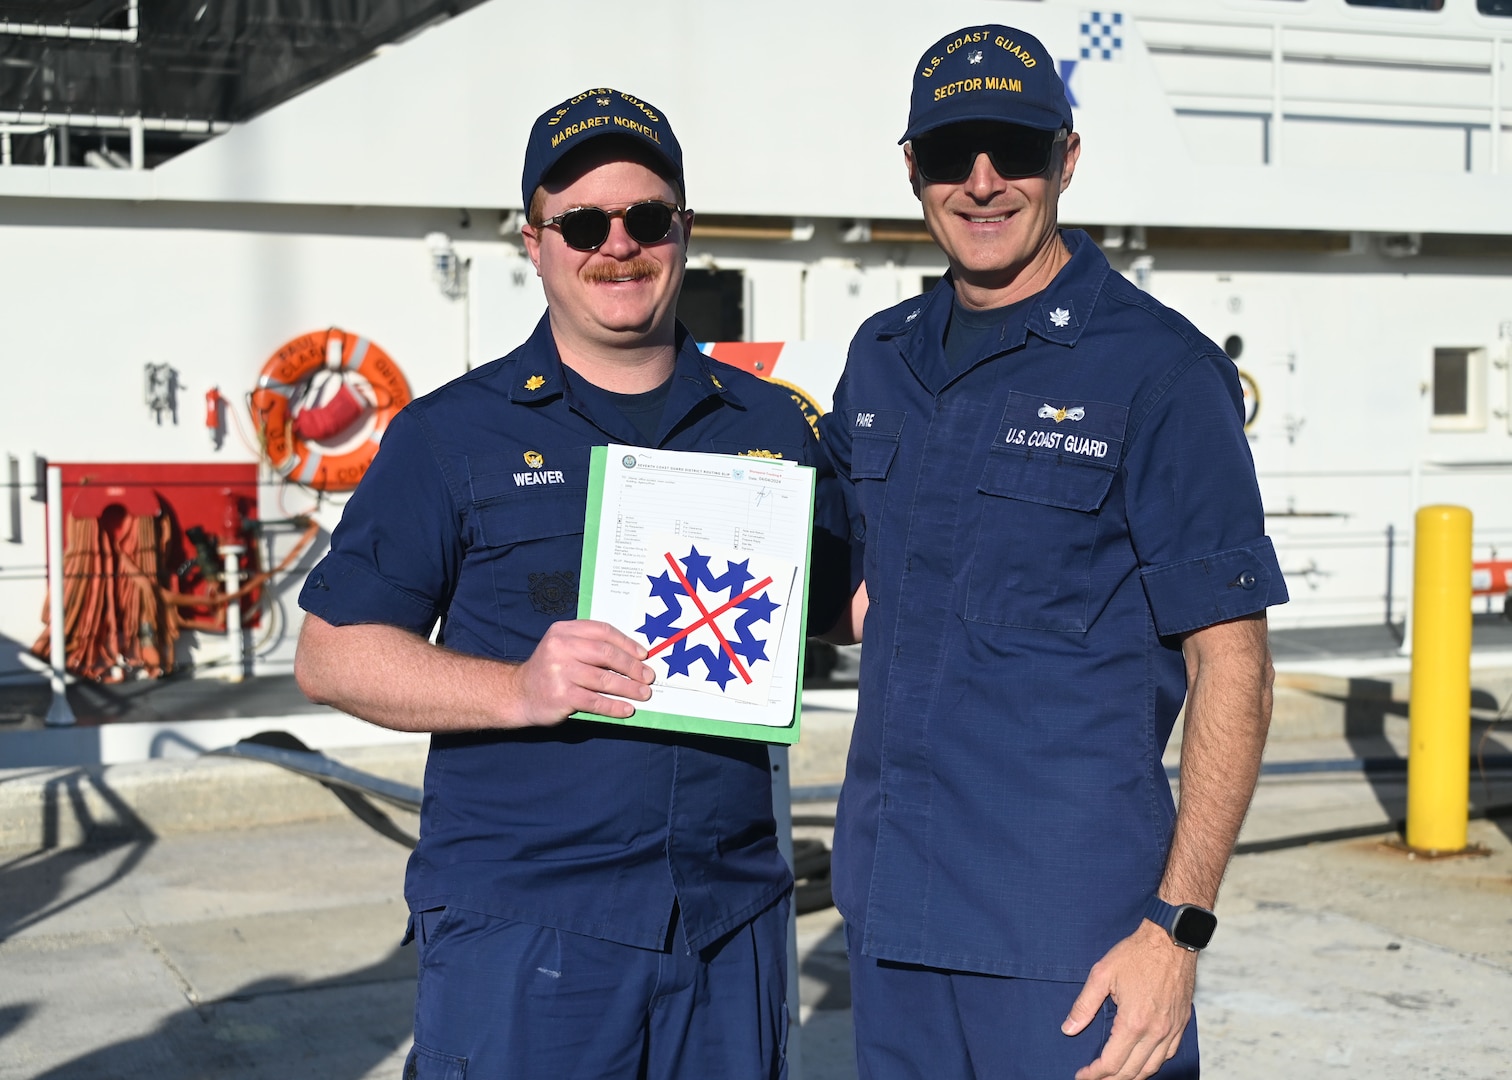 Cmdr. Eric Pare, Coast Guard Sector Miami chief of response, presents a snowflake with an "X" emblem to Lt. Cmdr. Colin Weaver, commanding officer of USCGC Margaret Norvell (WPC 1105), at Coast Guard Base Miami Beach, April 5, 2024. The cutter received the snowflake emblem for carrying out a successful drug interdiction. (U.S. Coast Guard photo by Petty Officer 2nd Class Diana Sherbs)